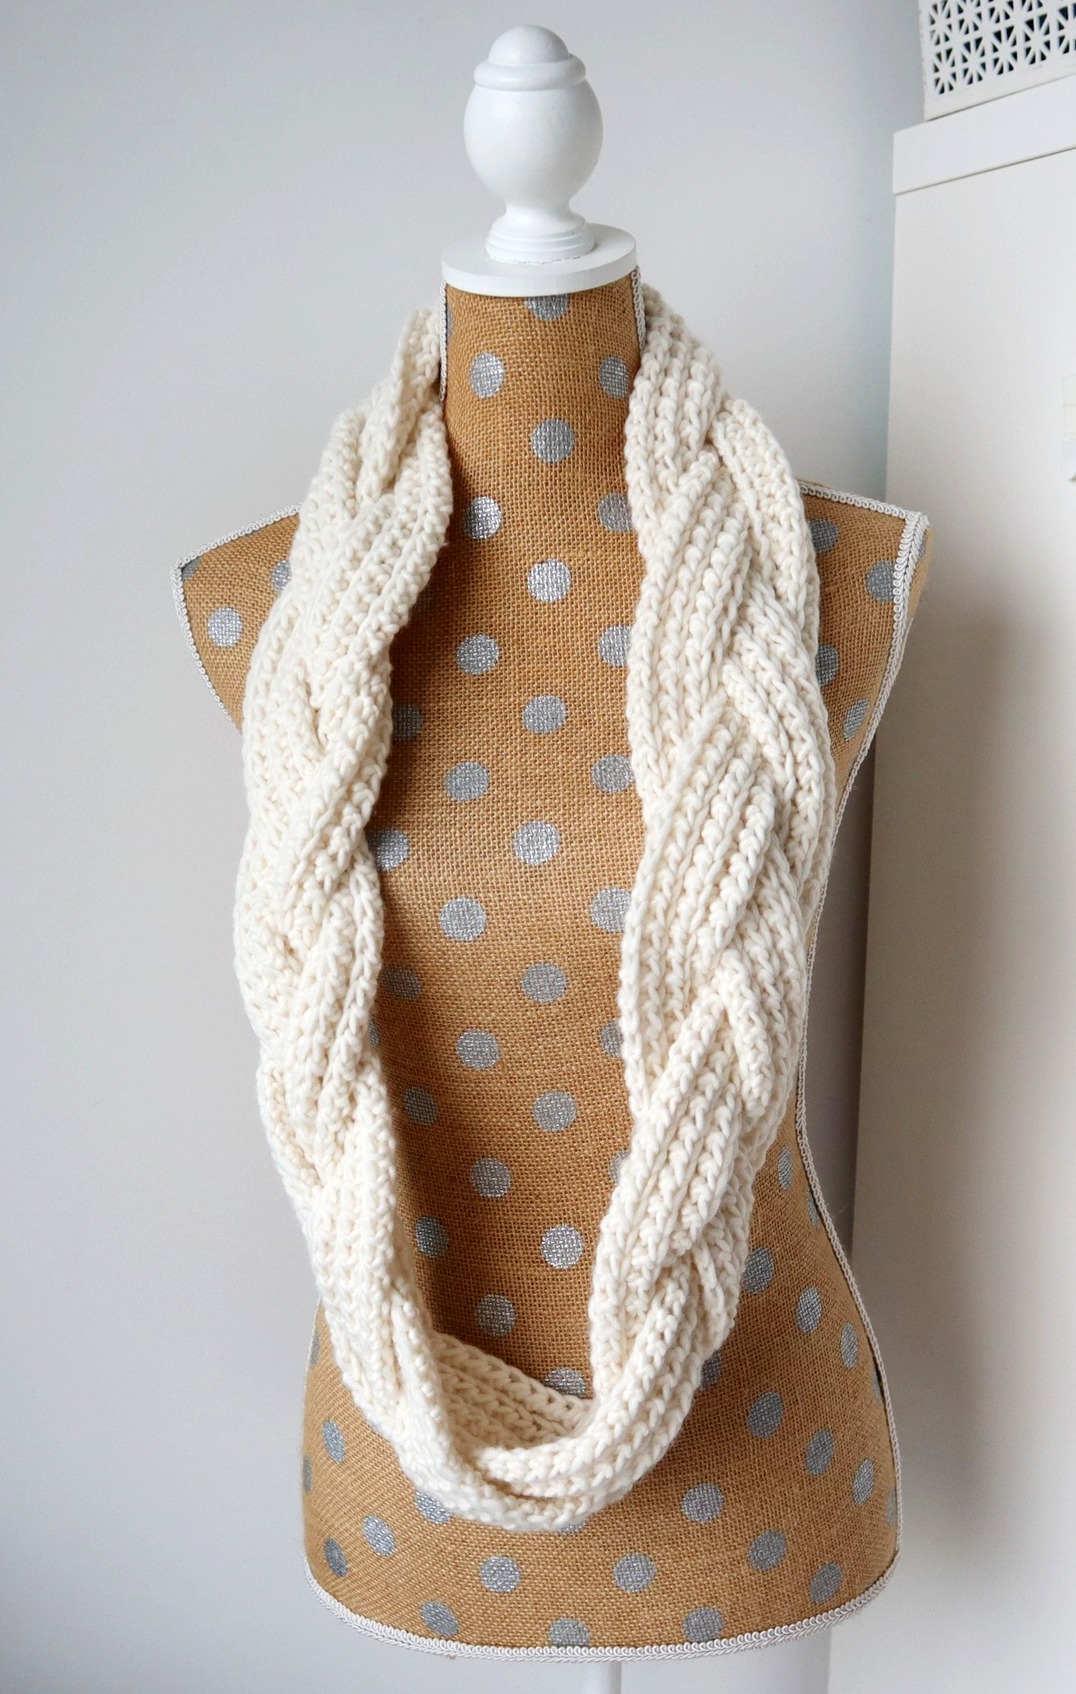 Accessories Scarves Crochet Scarves Gsus Crochet Scarf natural white-gold-colored cable stitch casual look 